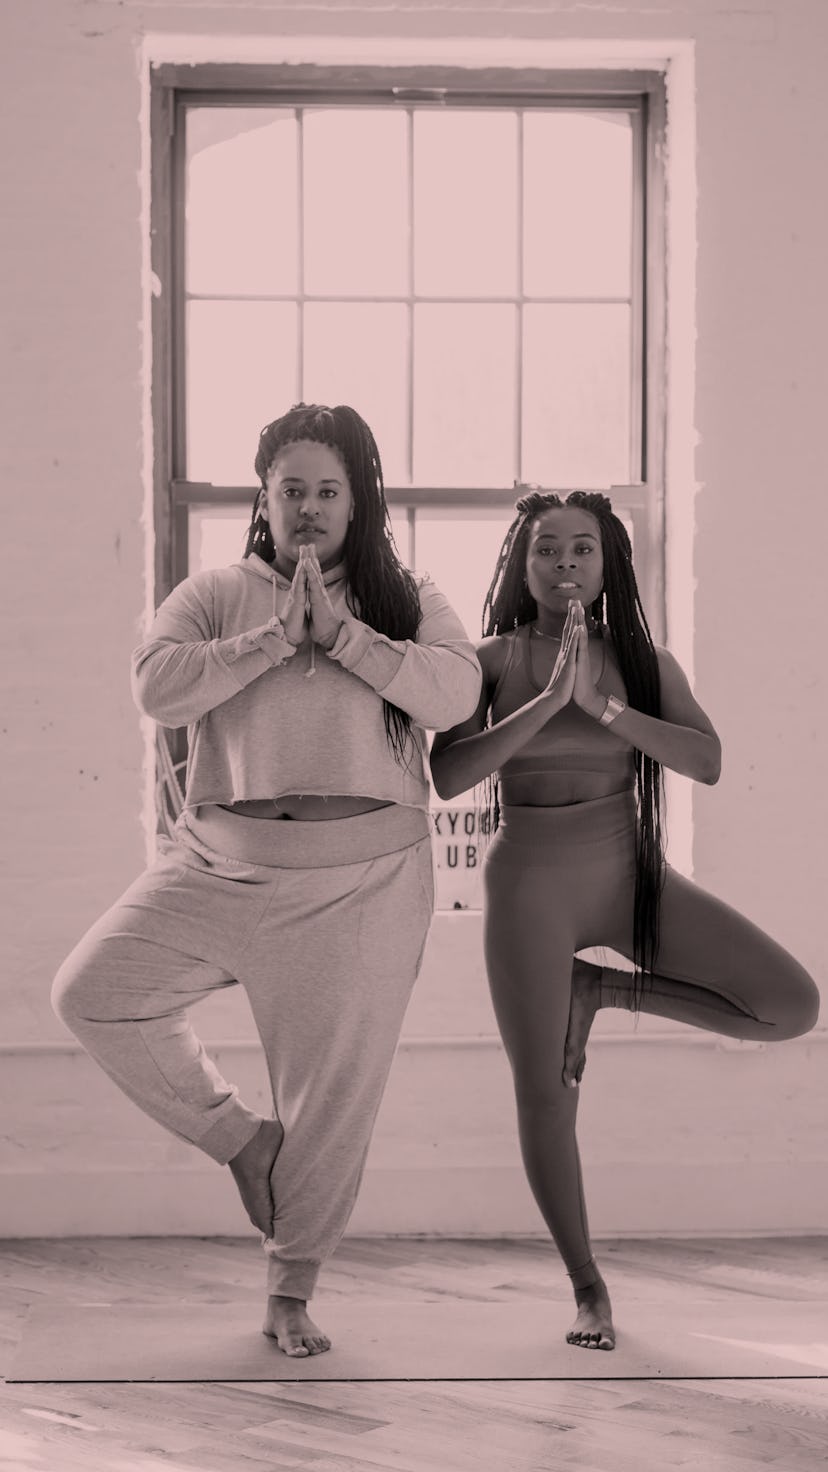 Two women holding a standing yoga pose in the fitness class in front of a window